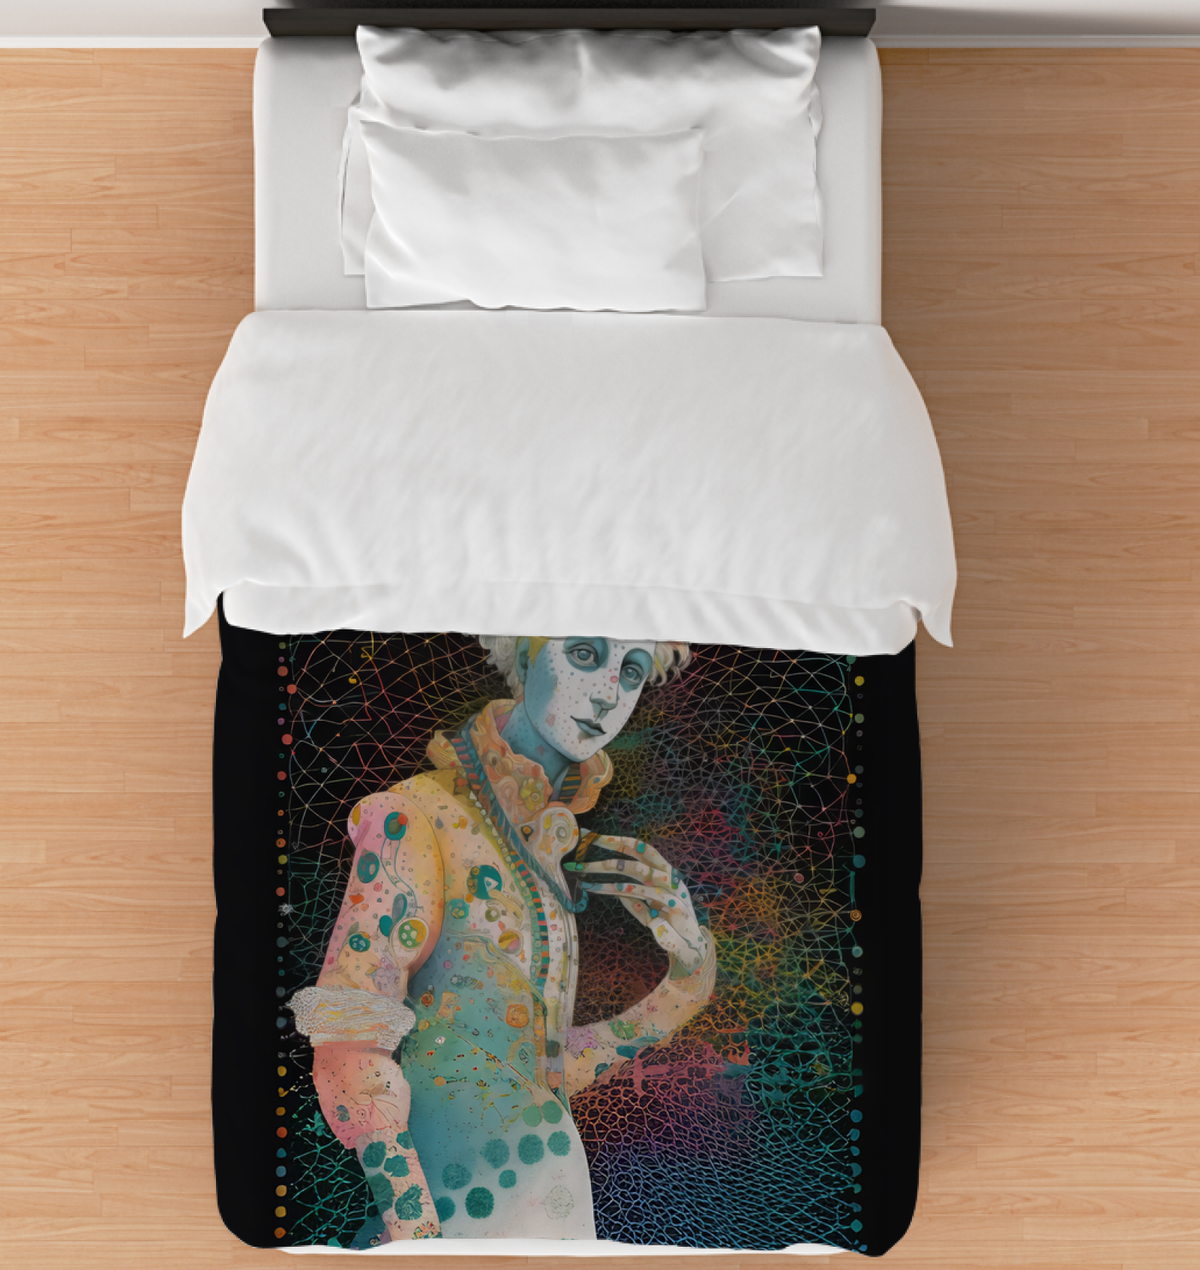 Vibrant Vibes Duvet Cover on a bed in a colorful bedroom.